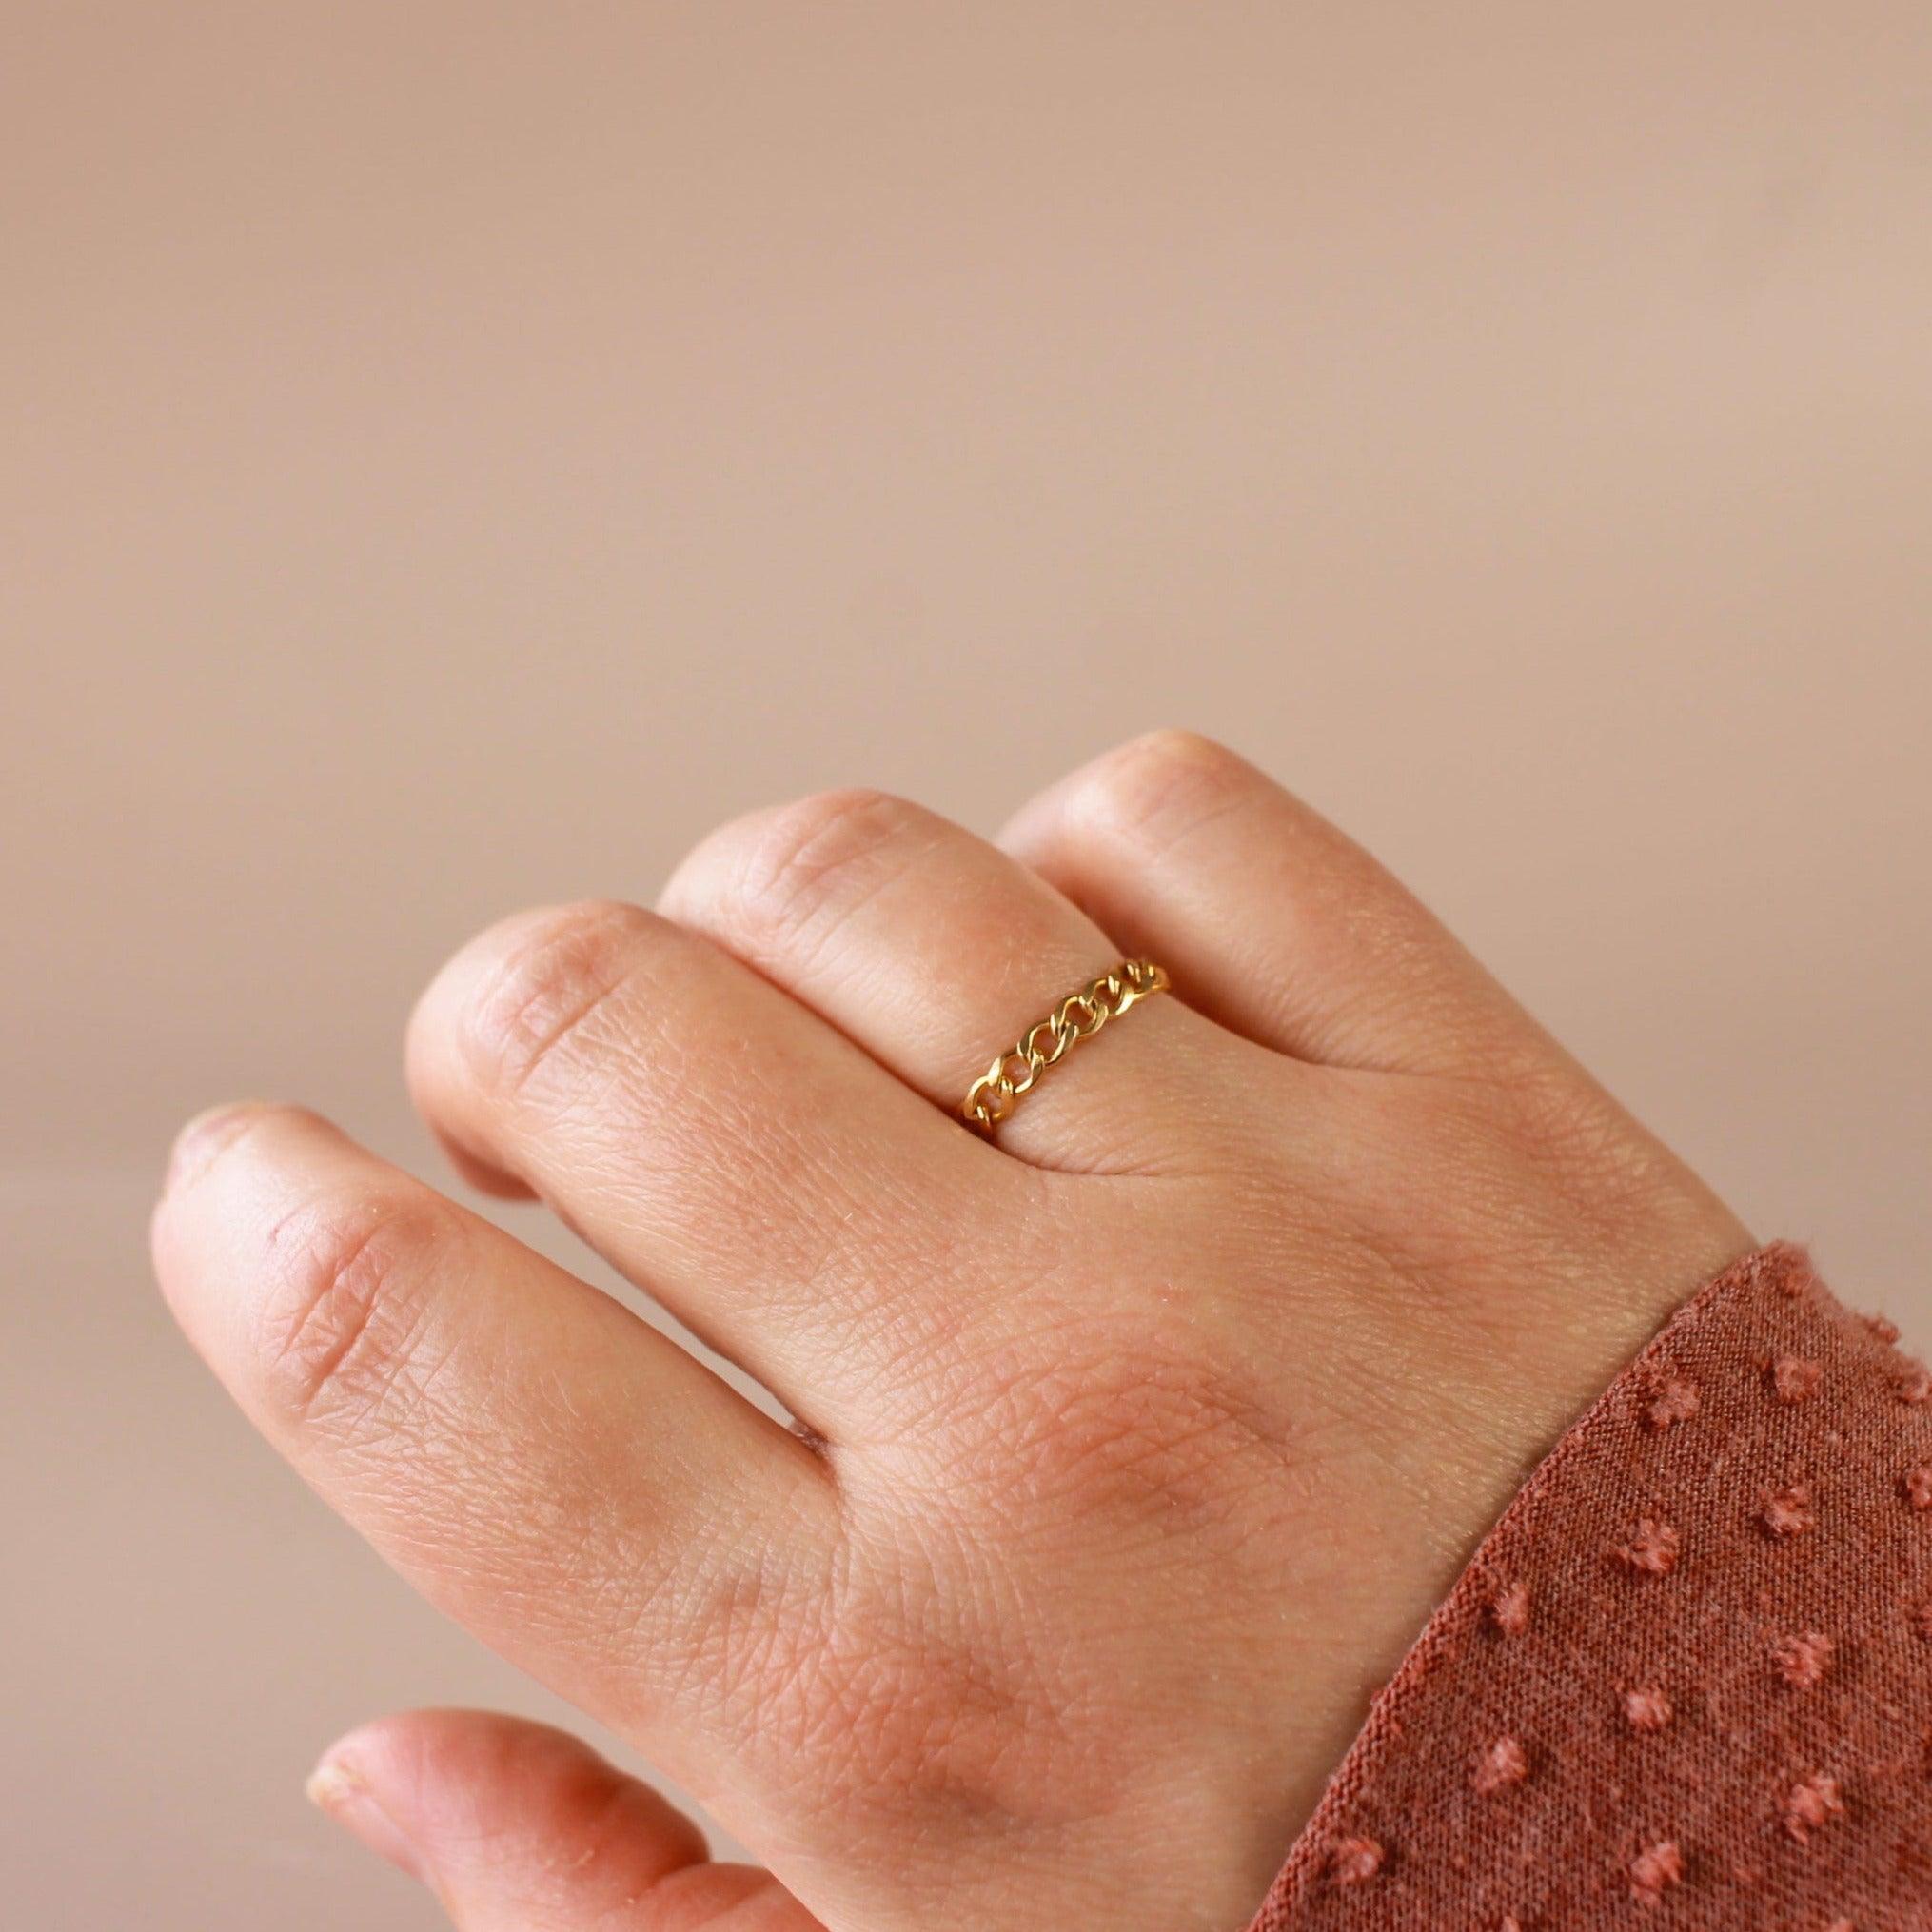 Wyatt Chain Ring - Nolia Jewelry - Meaningful + Sustainably Handcrafted Jewelry